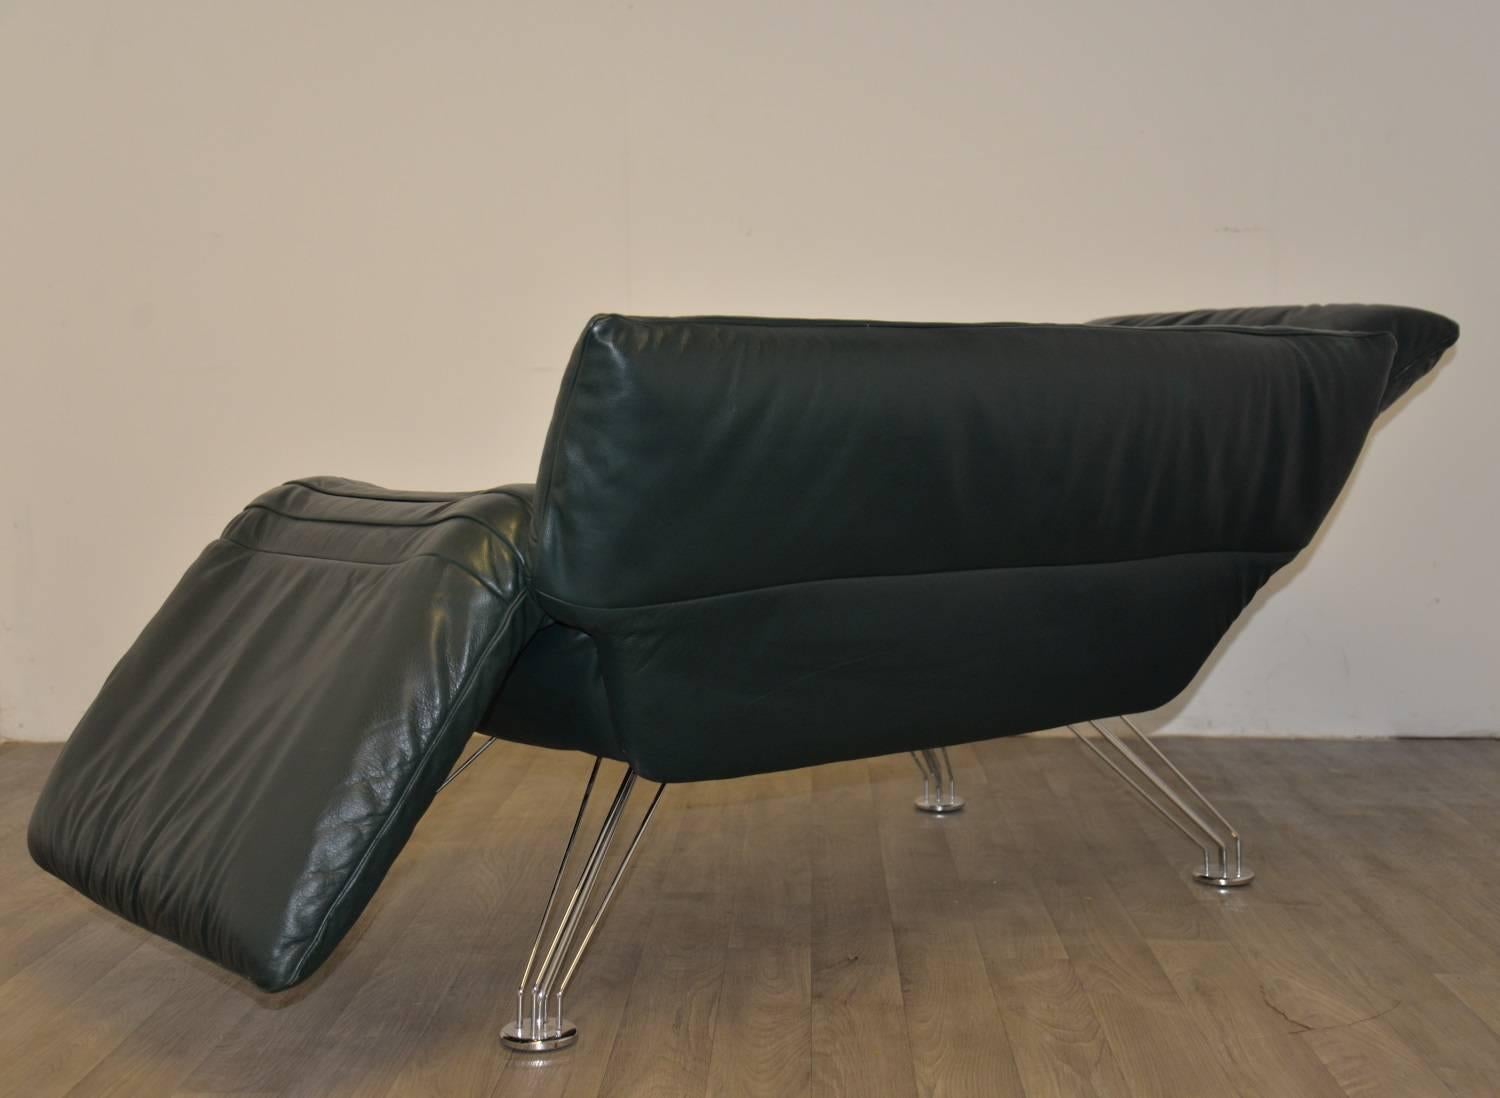 Leather Vintage de Sede Sofa or Chaise Longue in Jade leather by Winfried Totzek, 1988